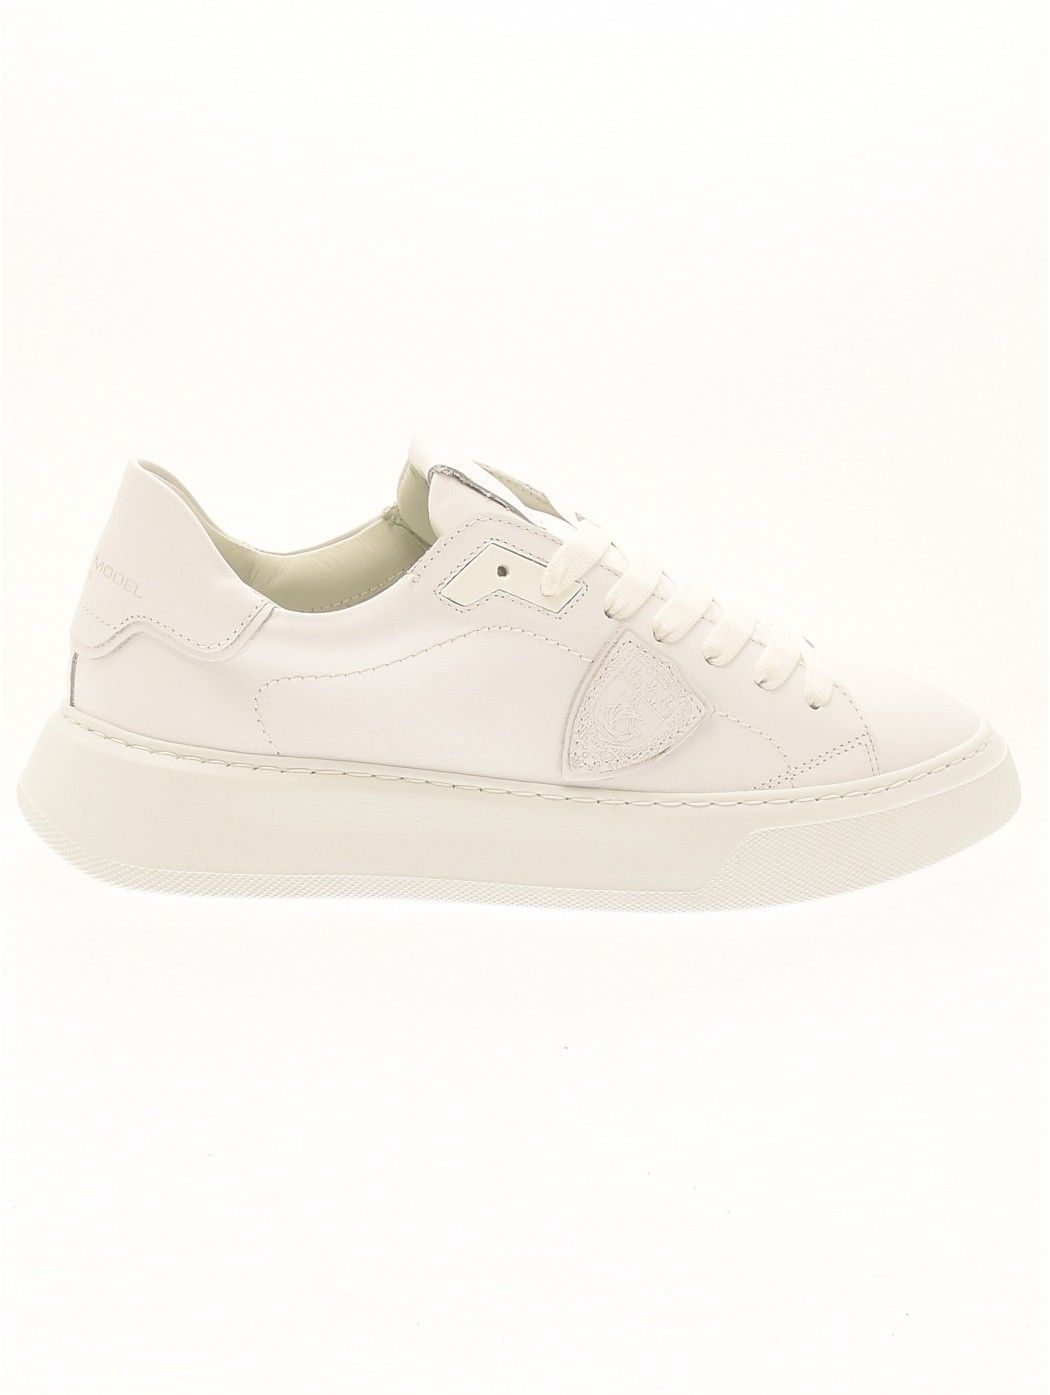 SNEAKERS DONNA TEMPLE PHILIPPE MODEL BTDL V001